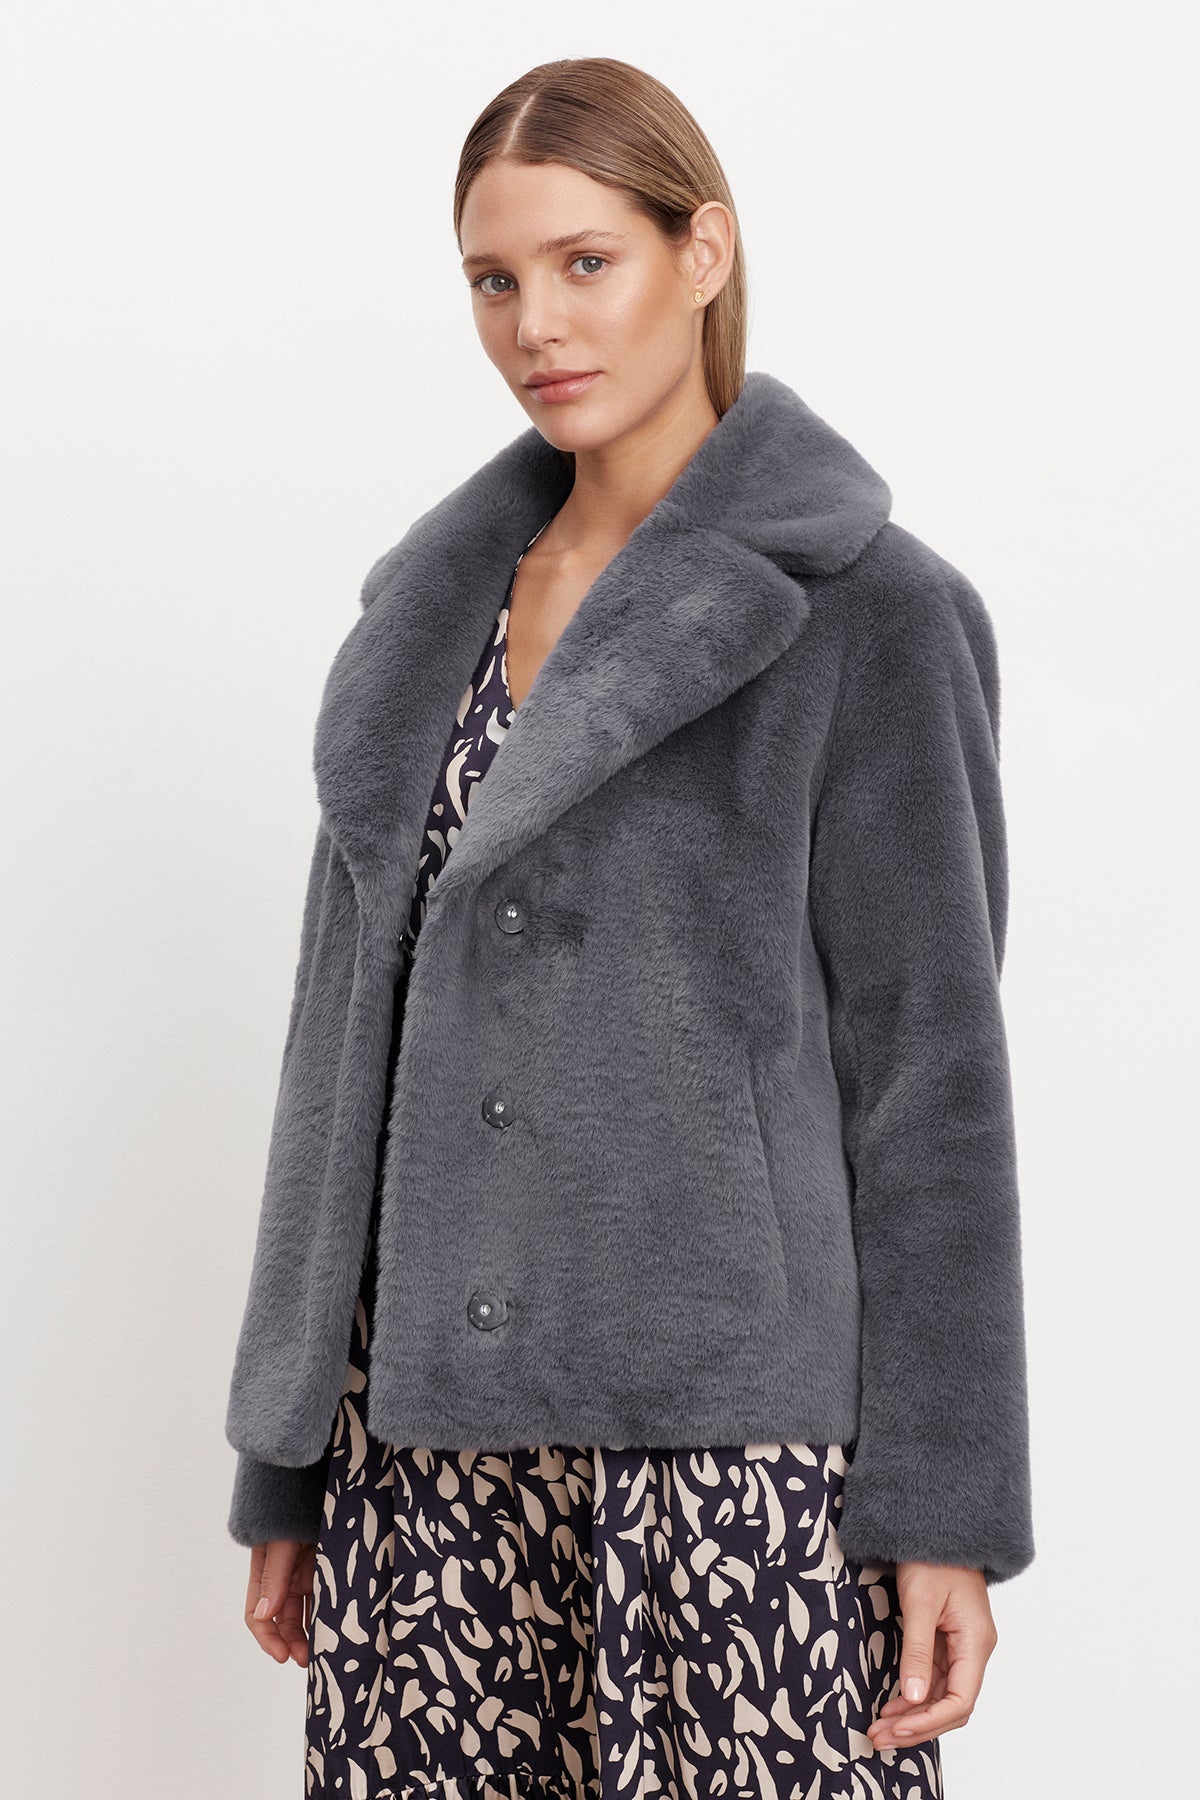   The model is wearing a grey Velvet by Graham & Spencer RAQUEL FAUX LUX FUR JACKET, perfect for cold weather. 